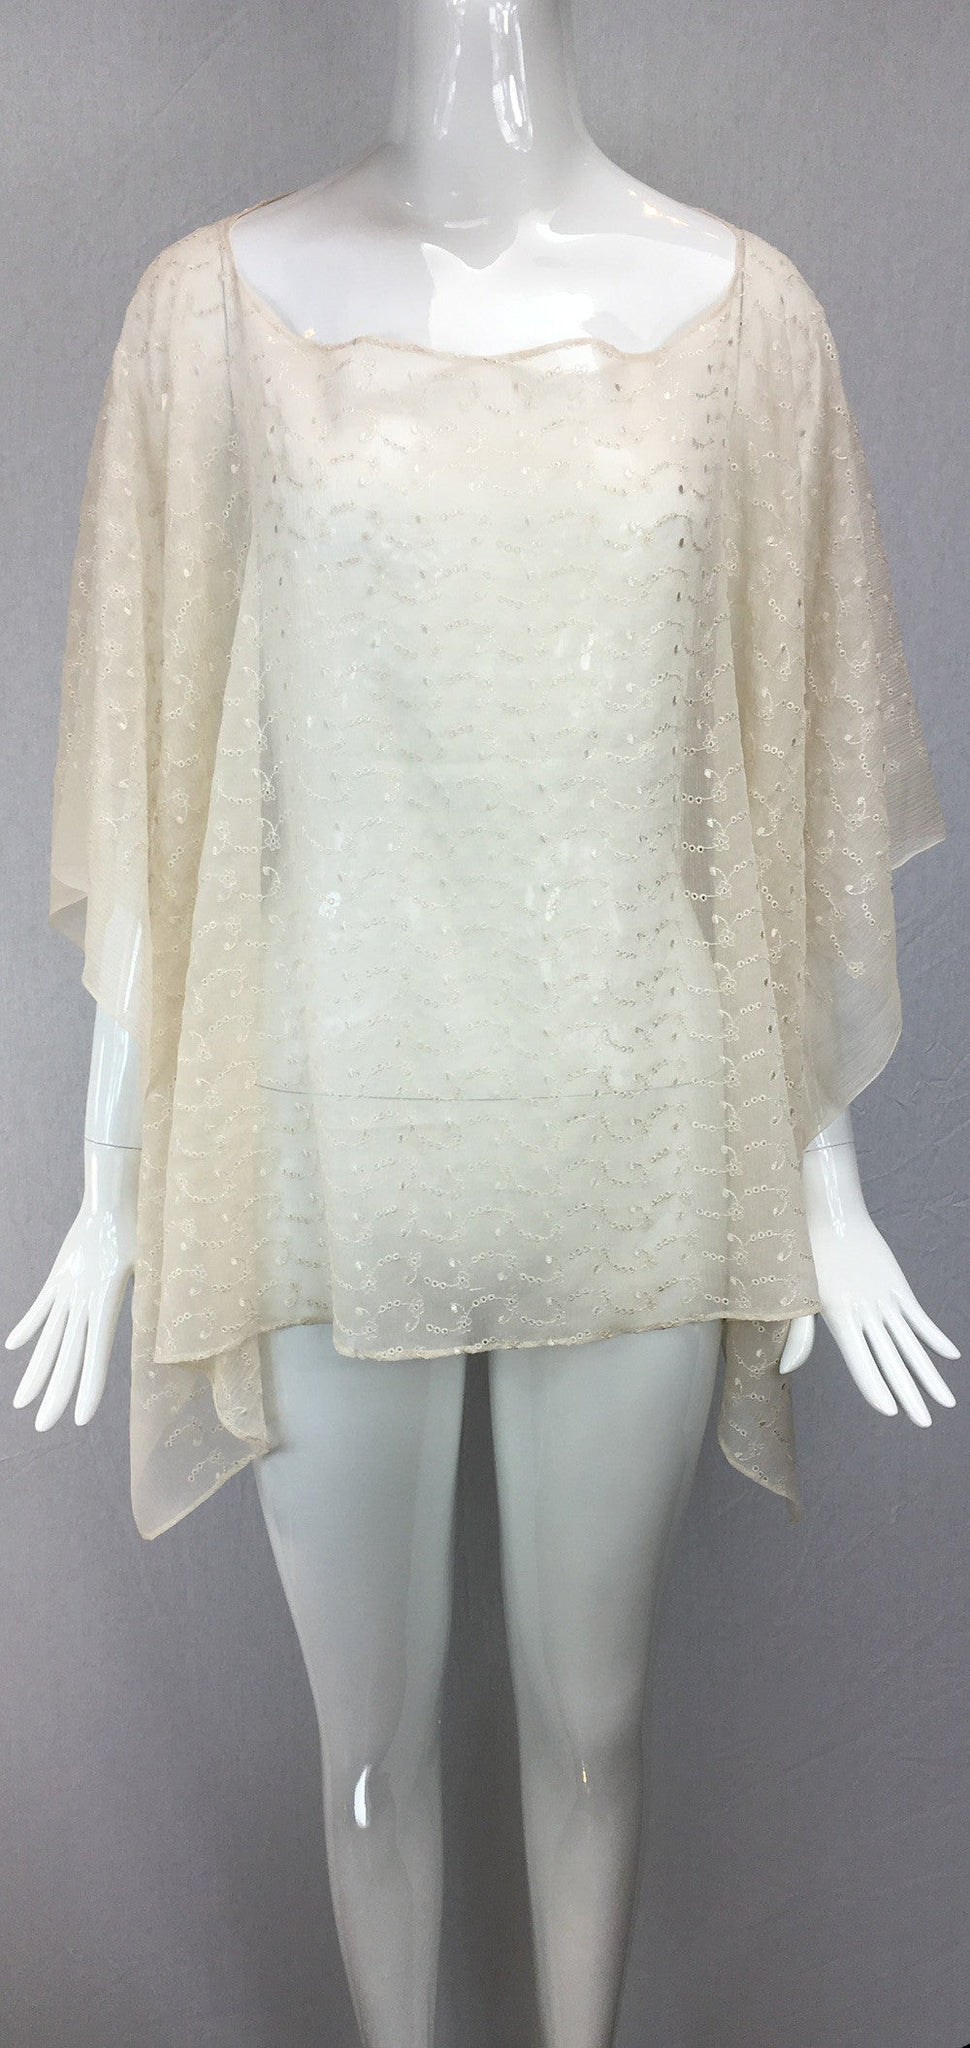 Janet Deleuse Embroidered Silk Chiffon Top